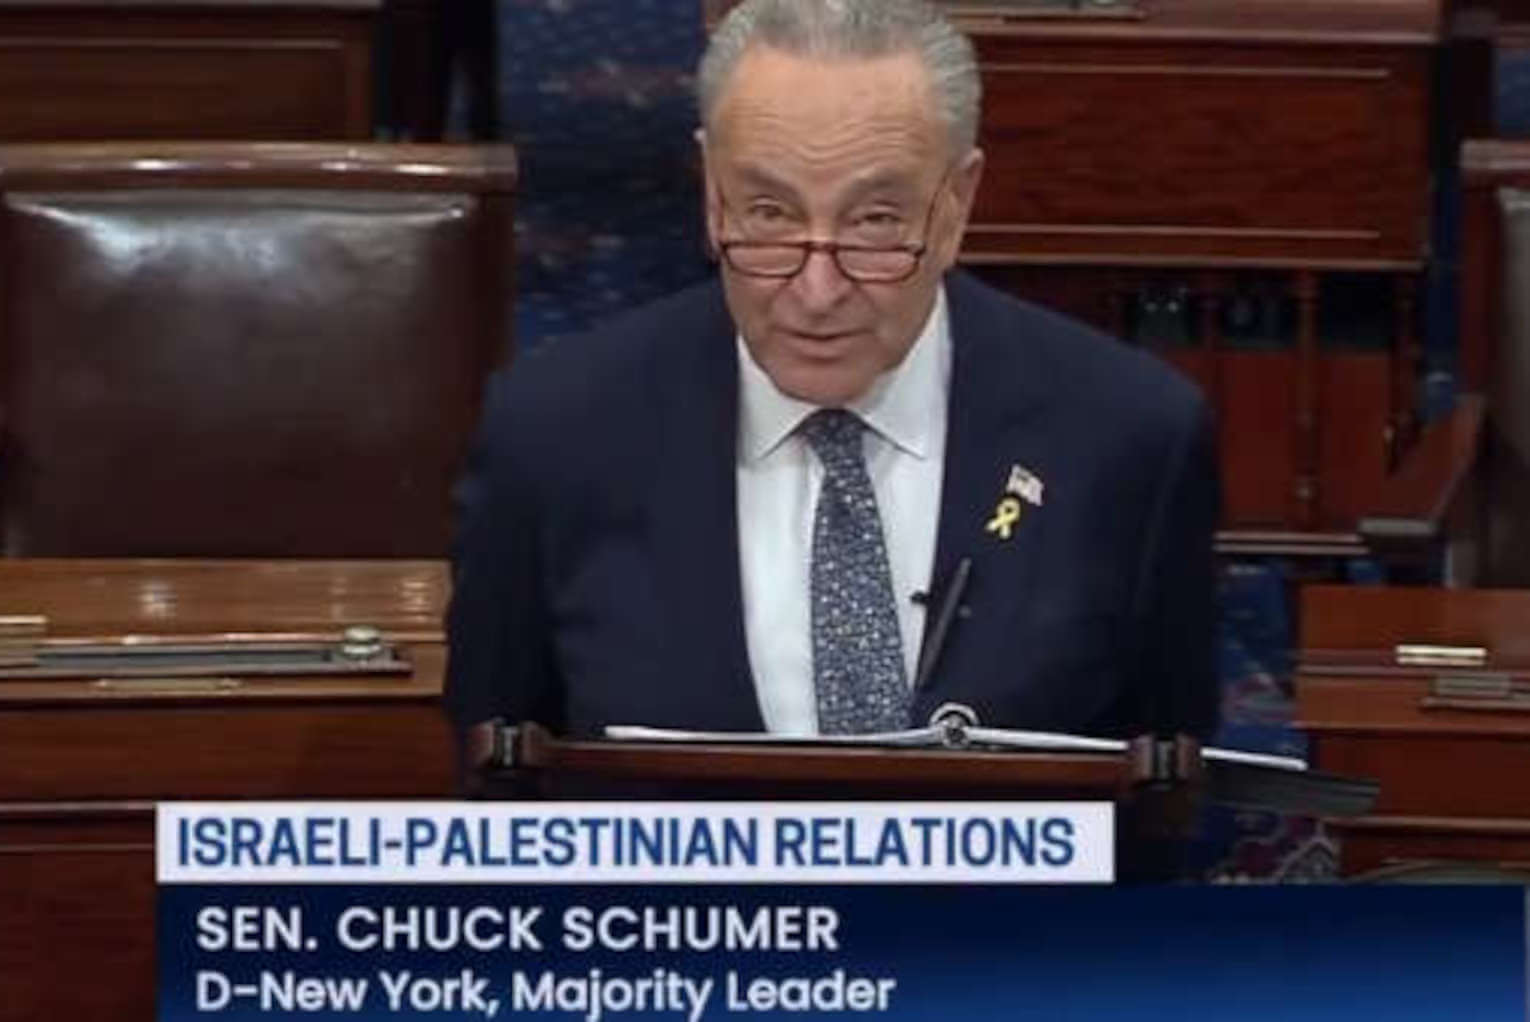 US Senate’s Schumer Sparks Furor for Call on Israel to Hold Elections, Replace Netanyahu